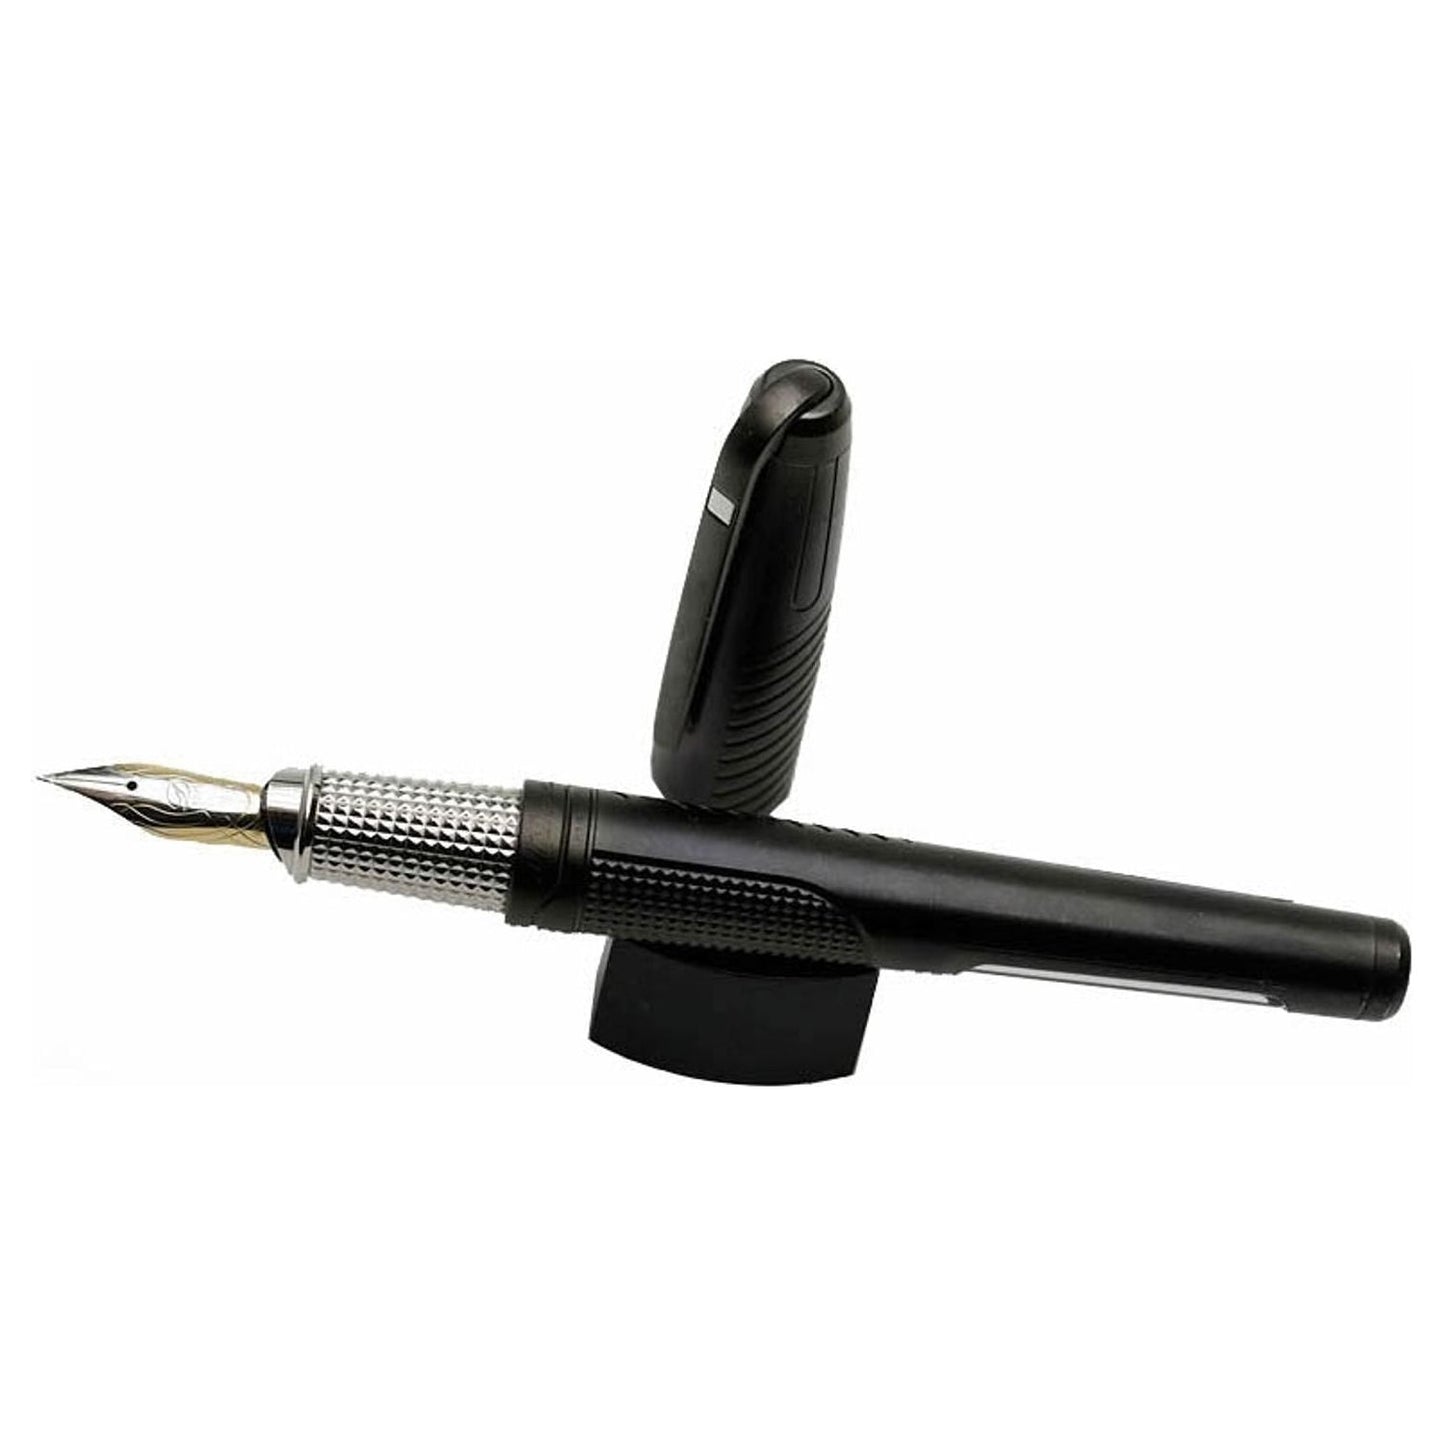 DUPONT WRITING PENNE S-T- DUPONT MOD. 481007 FASHION ACCESSORIES penne-s-t-dupont-mod-481007